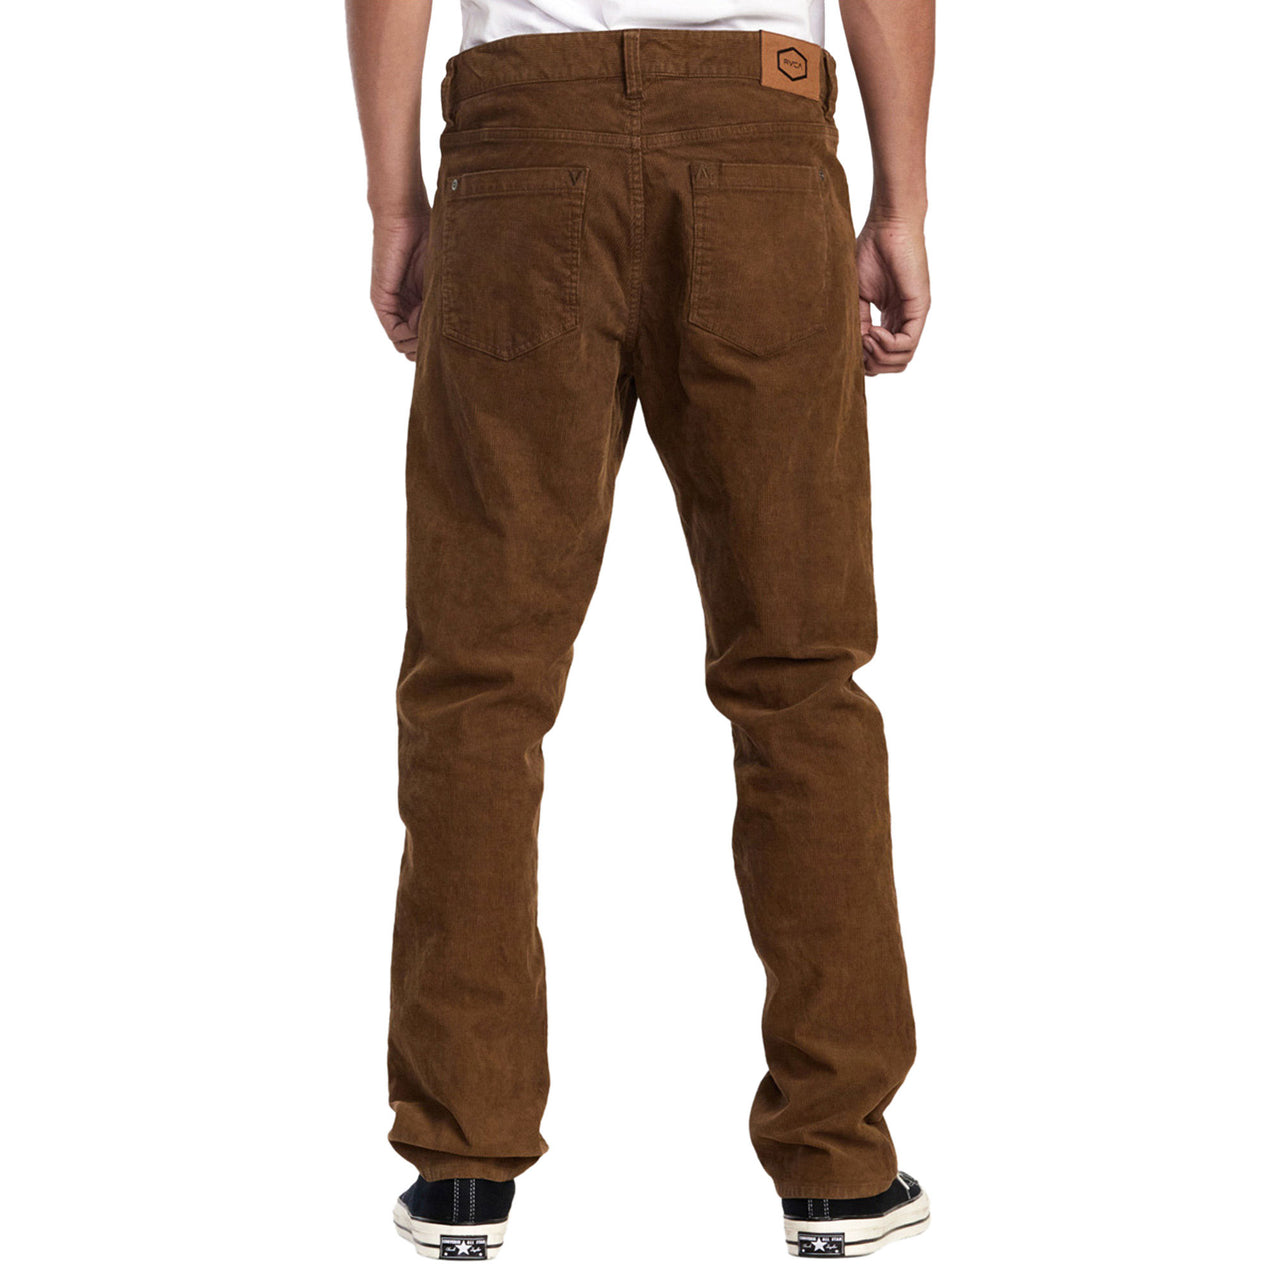 RVCA Daggers Pigment Cord Pants - Bombay Brown image 2